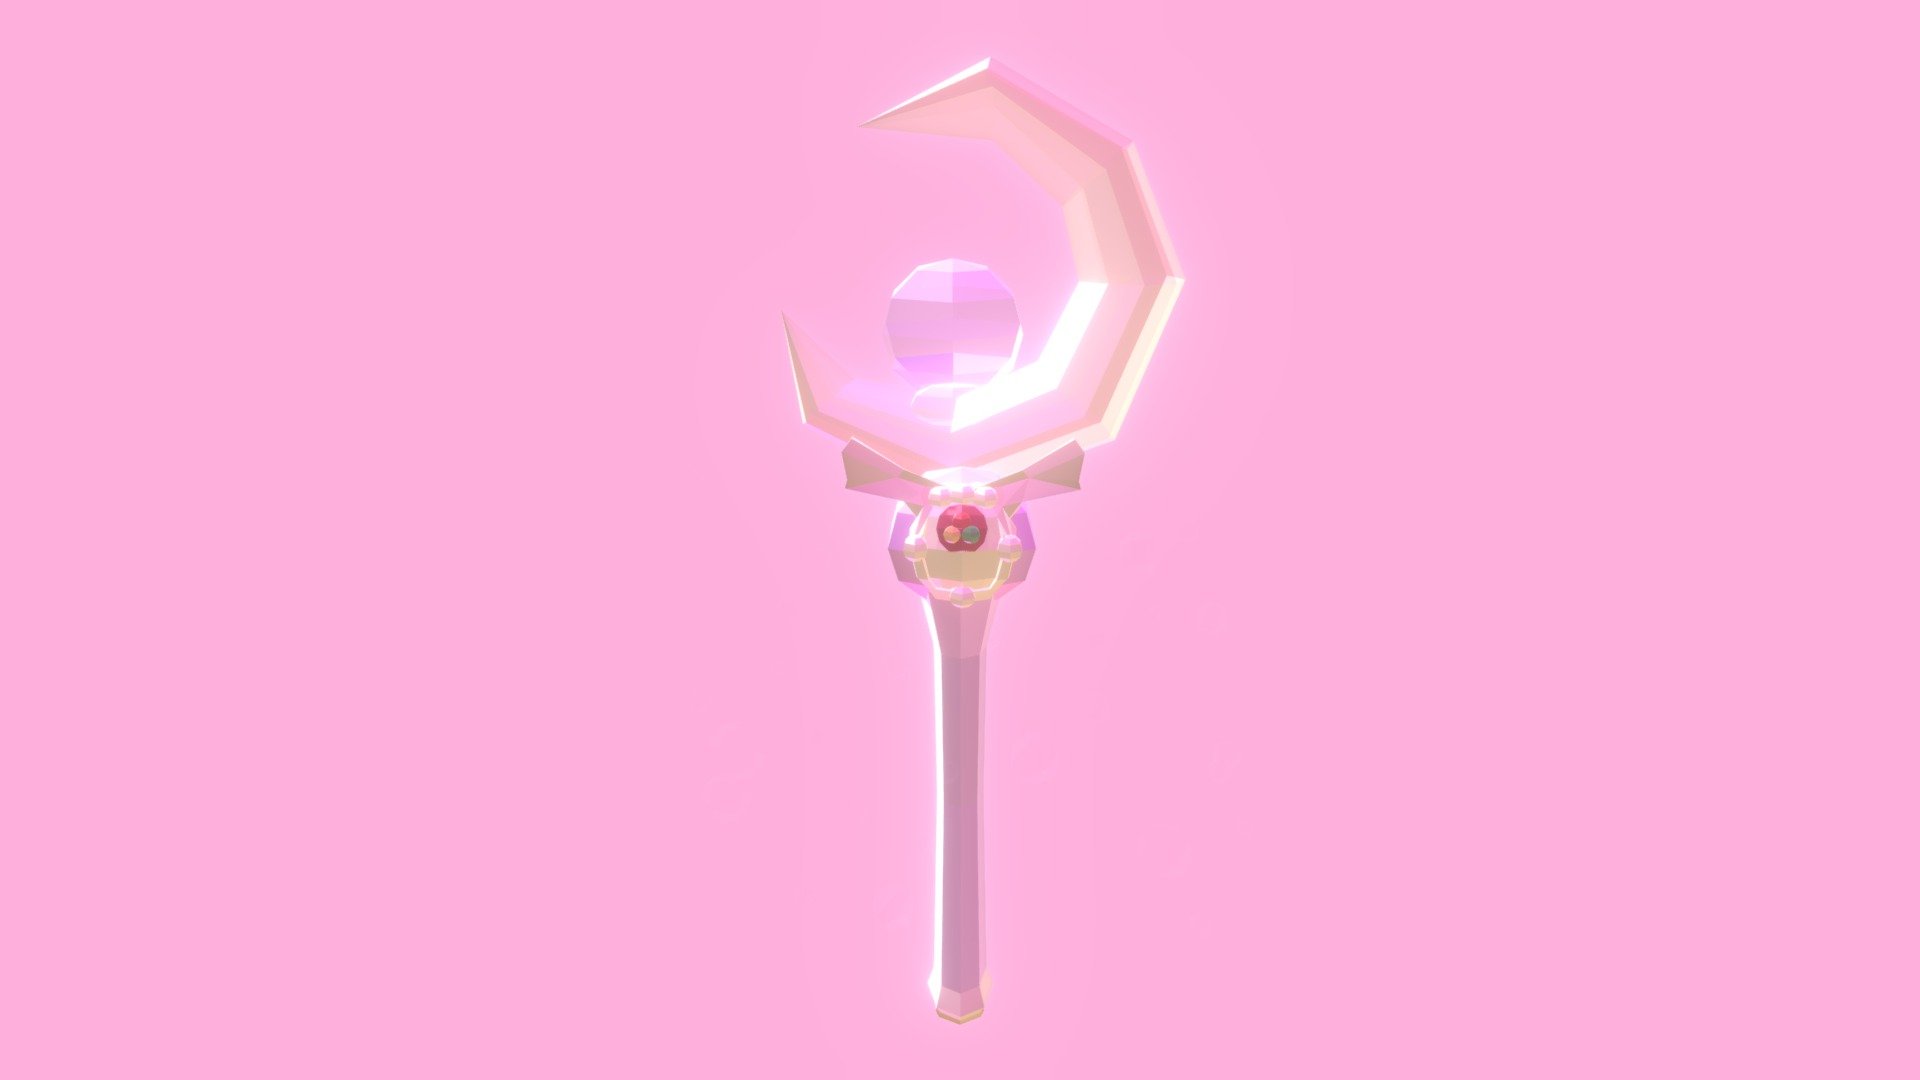 Made one of the wands from Sailor Moon - Sailor Moon Wand - 3D model by O.M (@newtss) 3d model